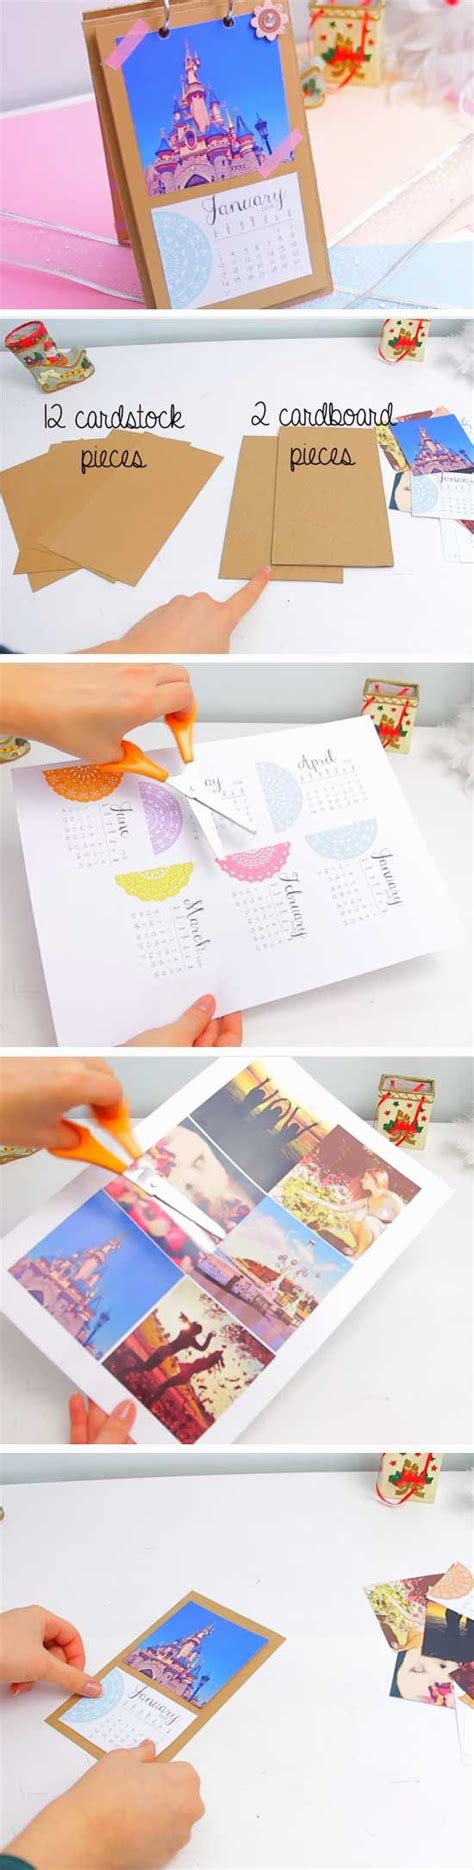 Make personal diy birthday gifts for your friends and family! Last Minute Diy Christmas Gifts For Mom And Dad - Home ...